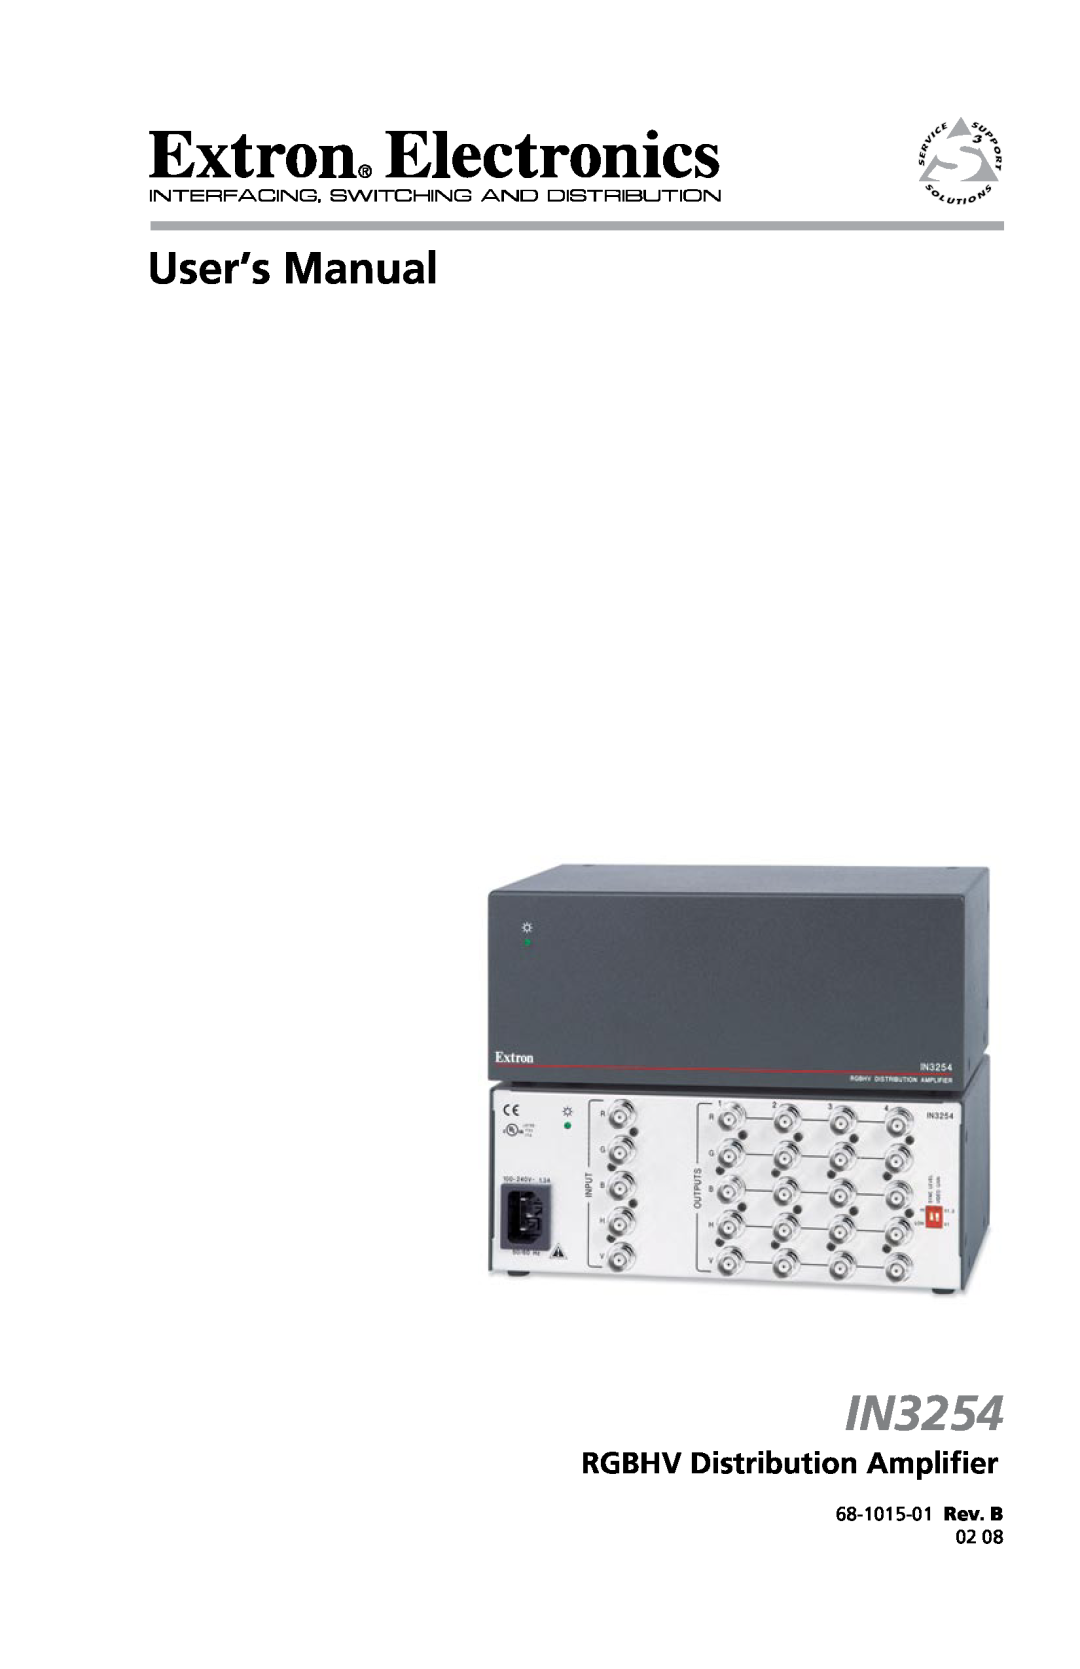 Extron electronic IN3254 user manual RGBHV Distribution Amplifier, Preliminary, 68-1015-01 Rev. B 